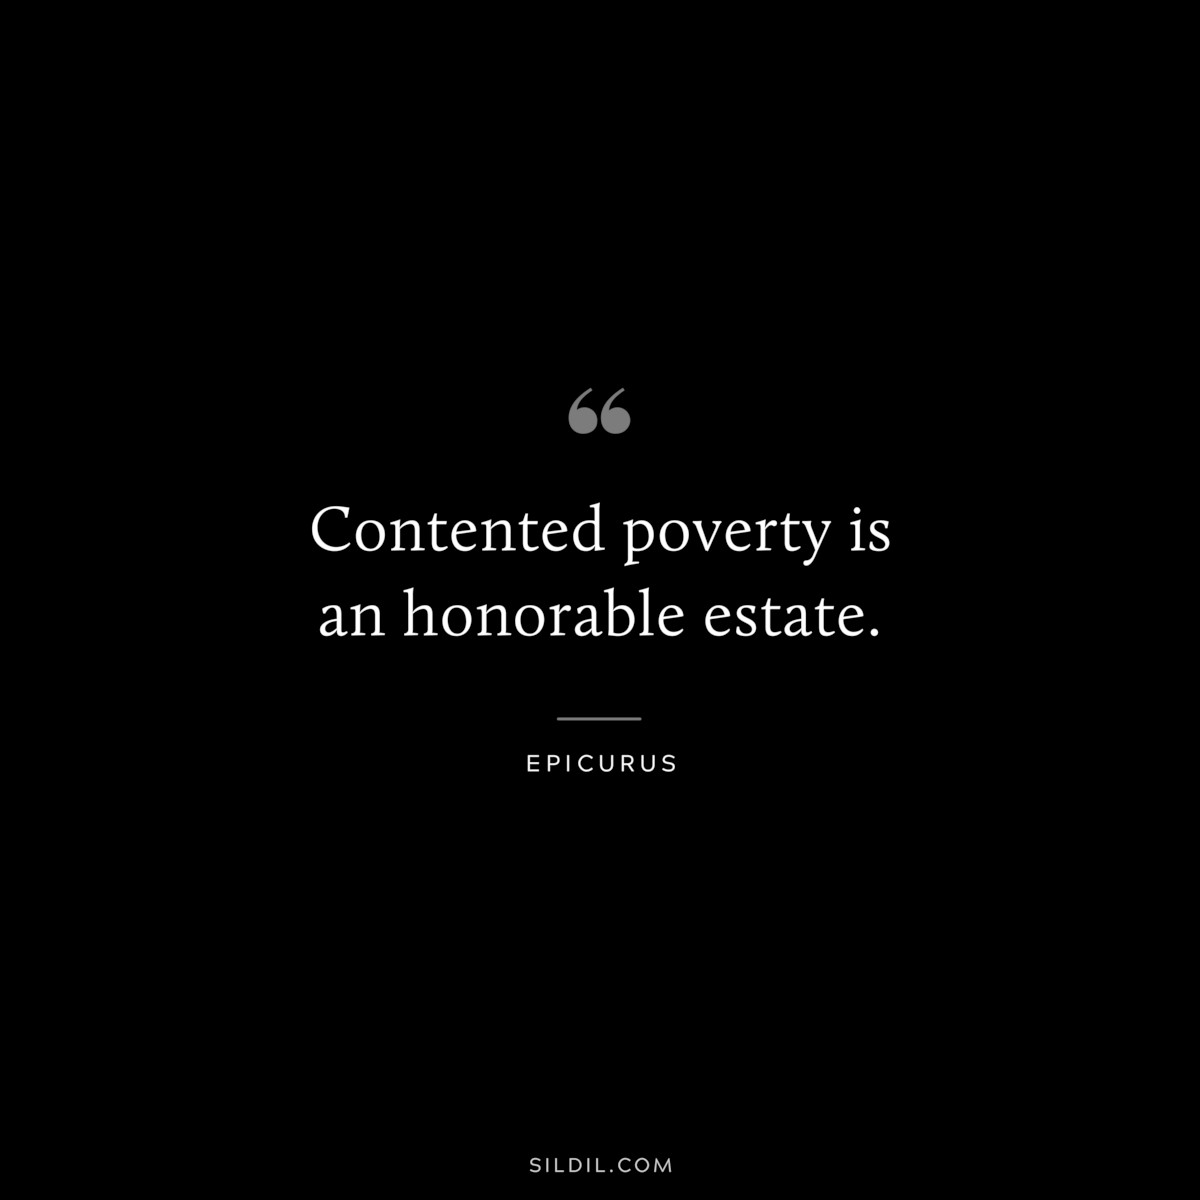 Contented poverty is an honorable estate. — Epicurus